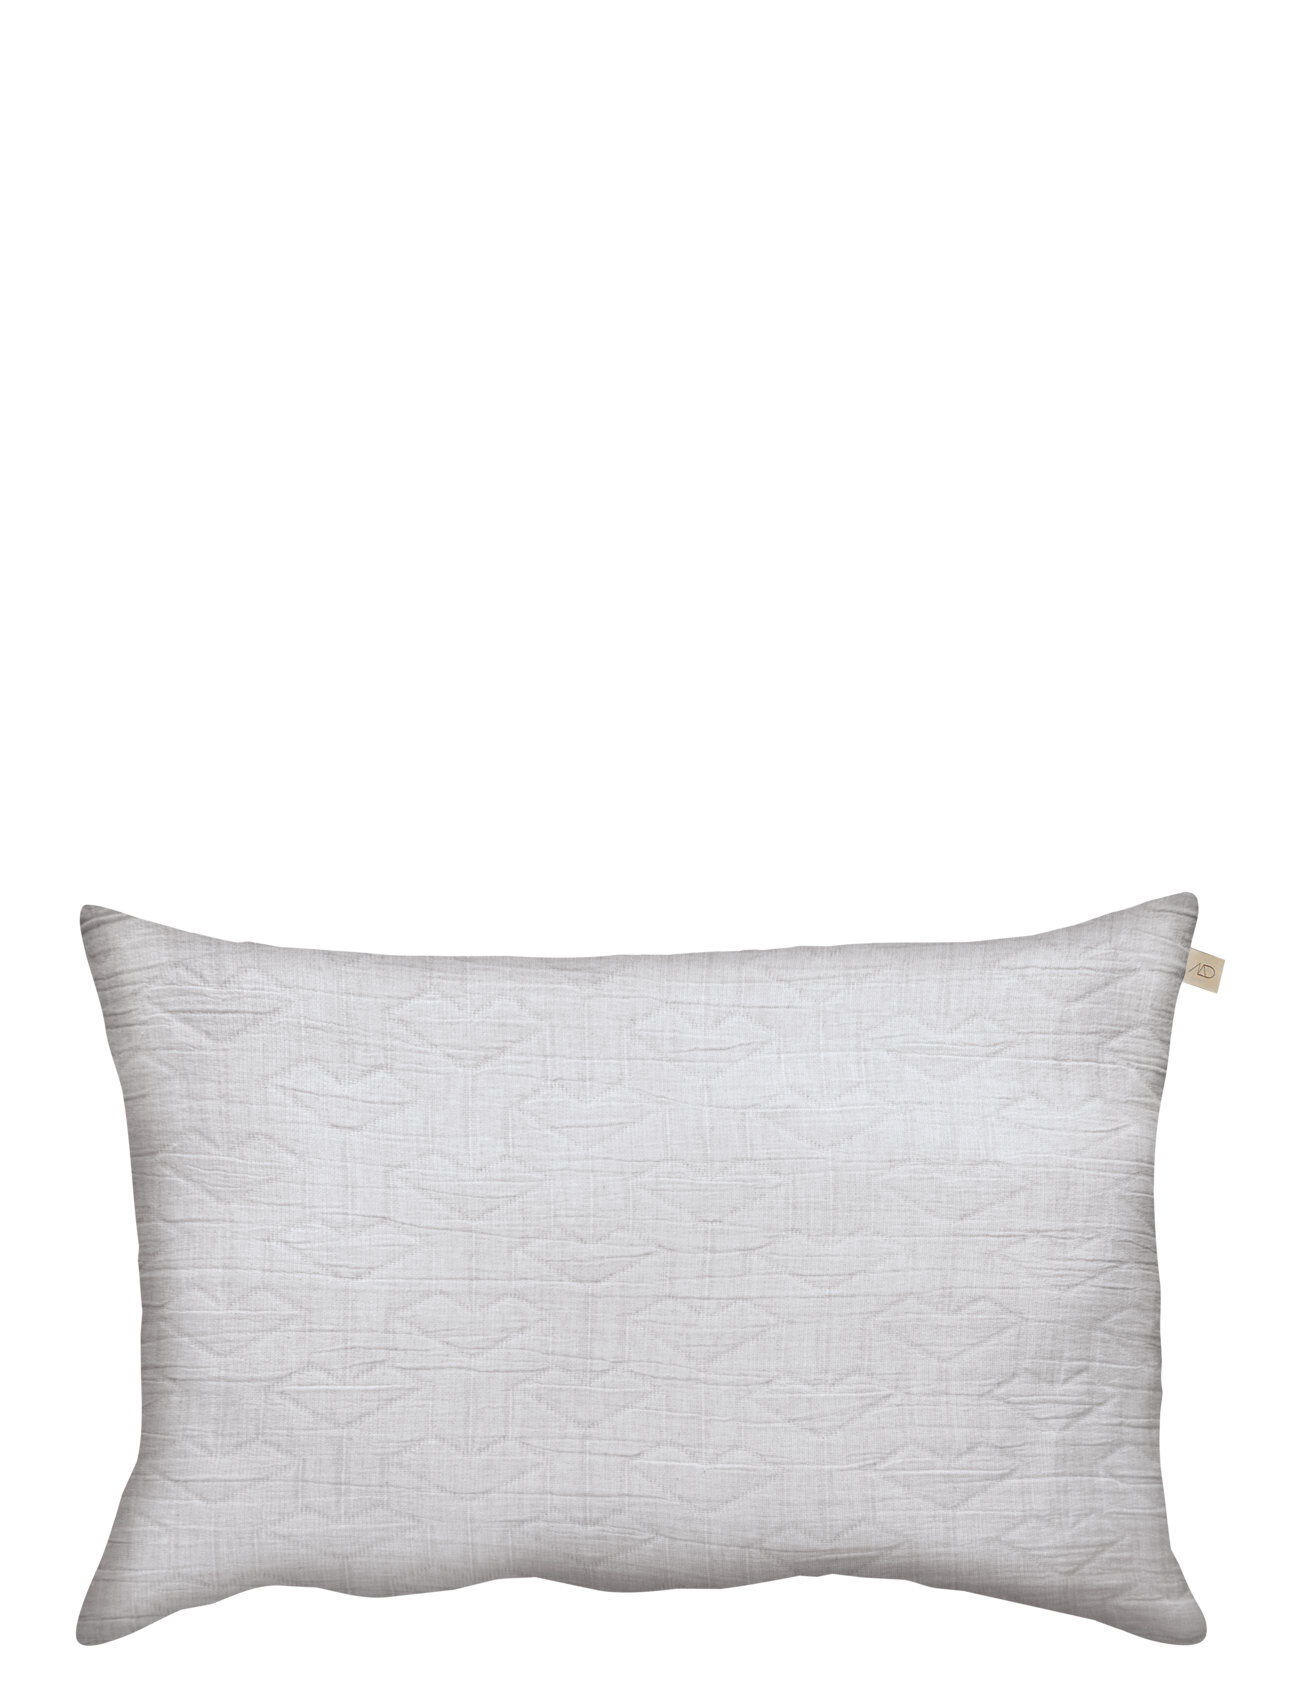 Mette Ditmer Trio Cushion With Filling Home Textiles Cushions & Blankets Cushions Grå Mette Ditmer